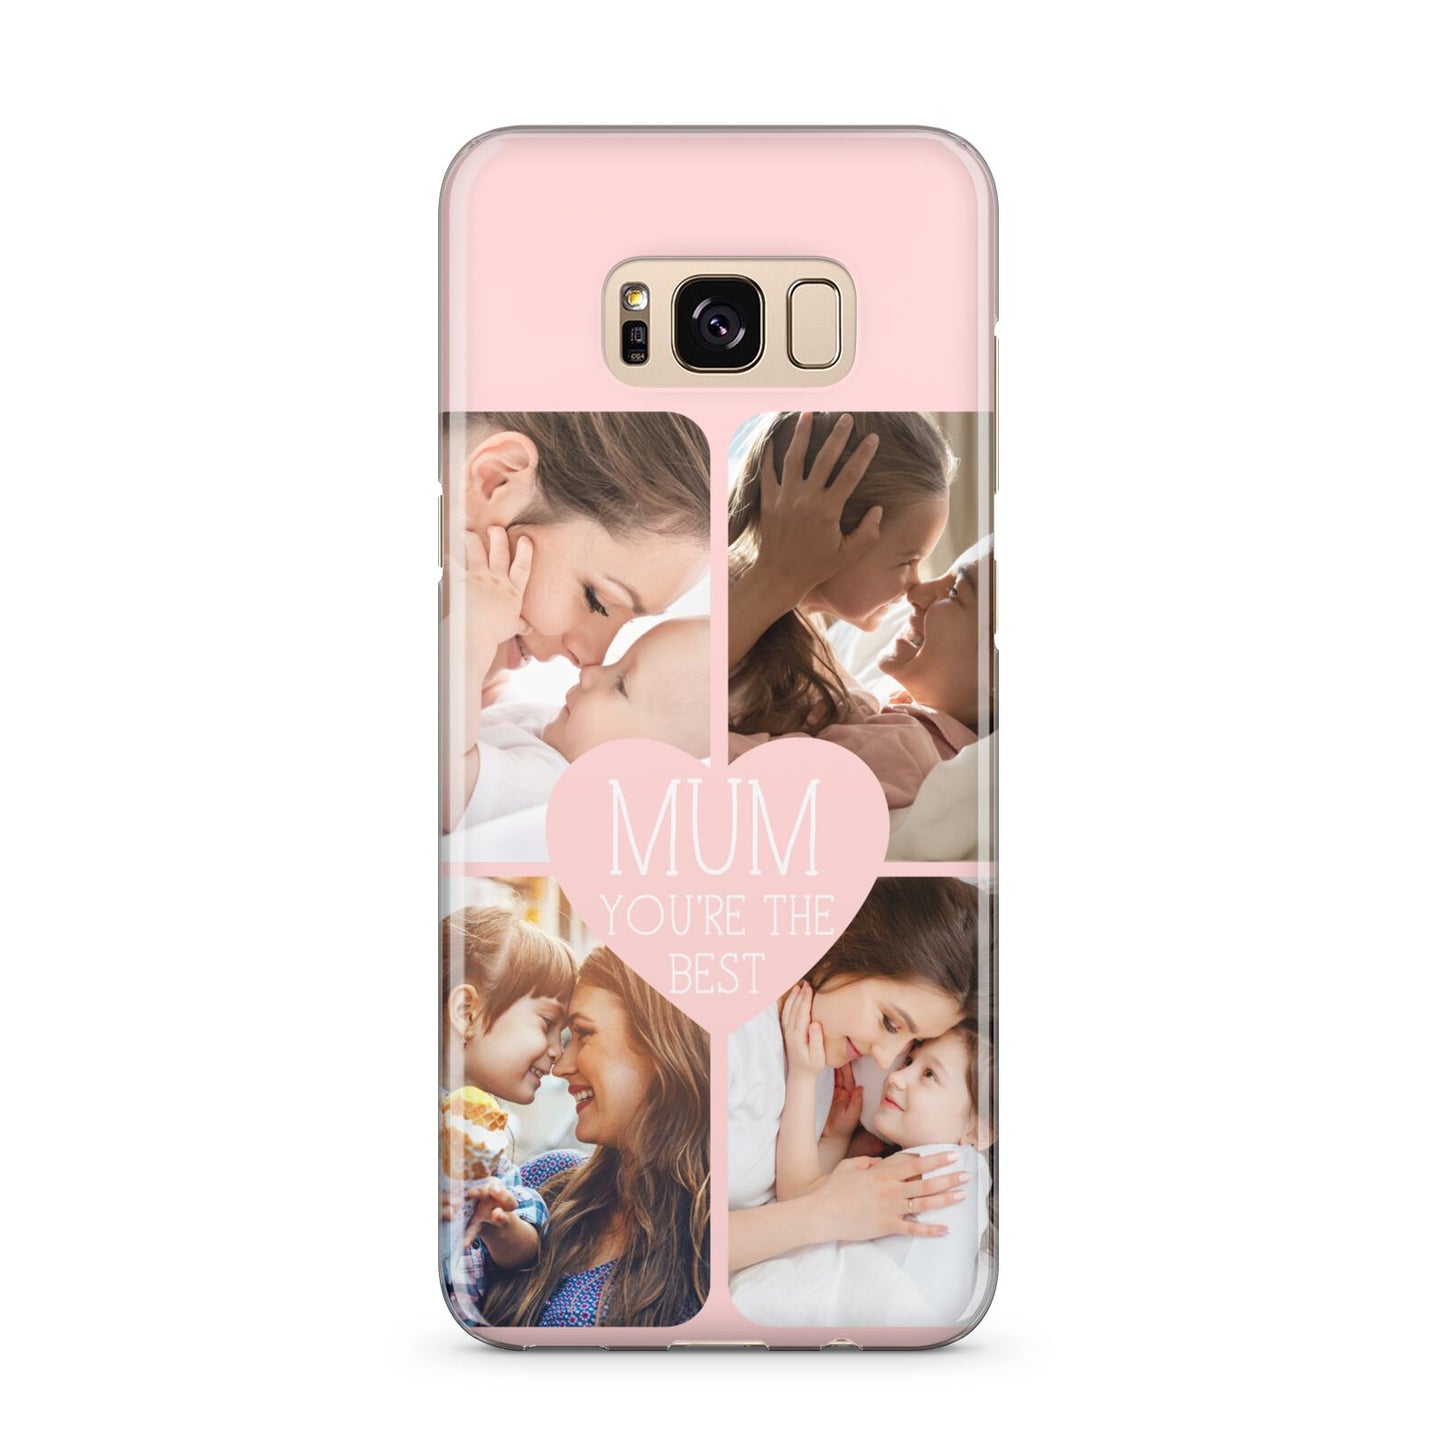 Mothers Day Four Photo Upload Samsung Galaxy S8 Plus Case